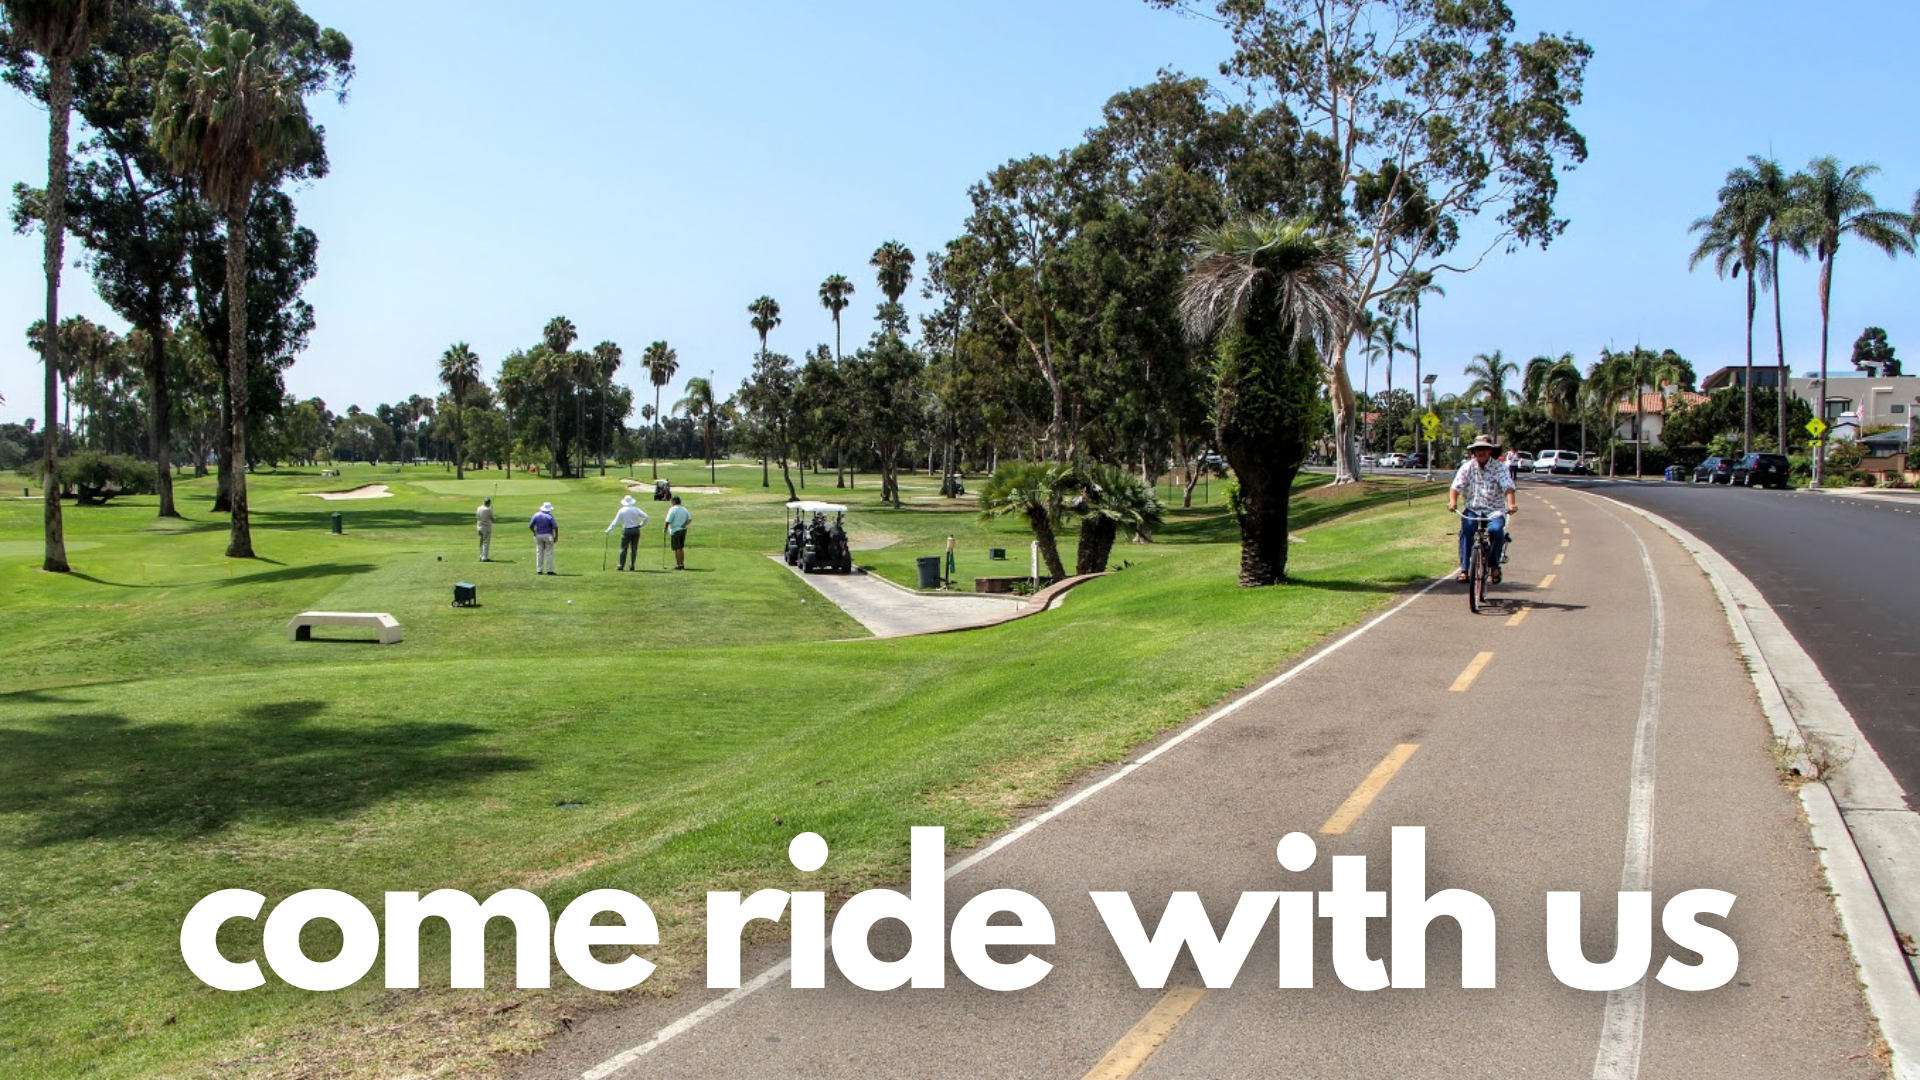 text shows come ride with us with a bike path running next to a park and a man riding his bike on the path